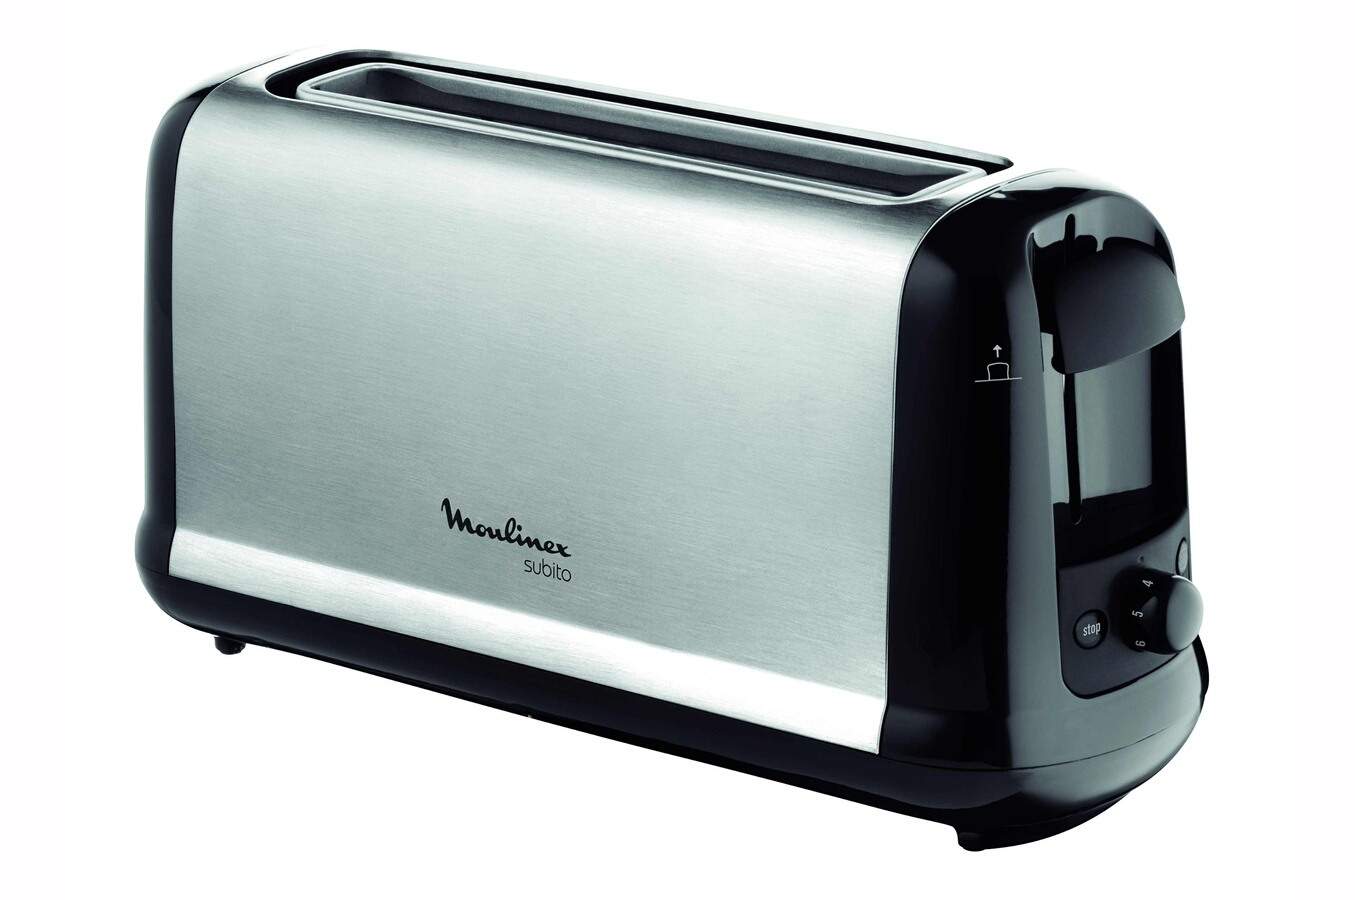  Moulinex Subito black and brushed stainless steel toaster